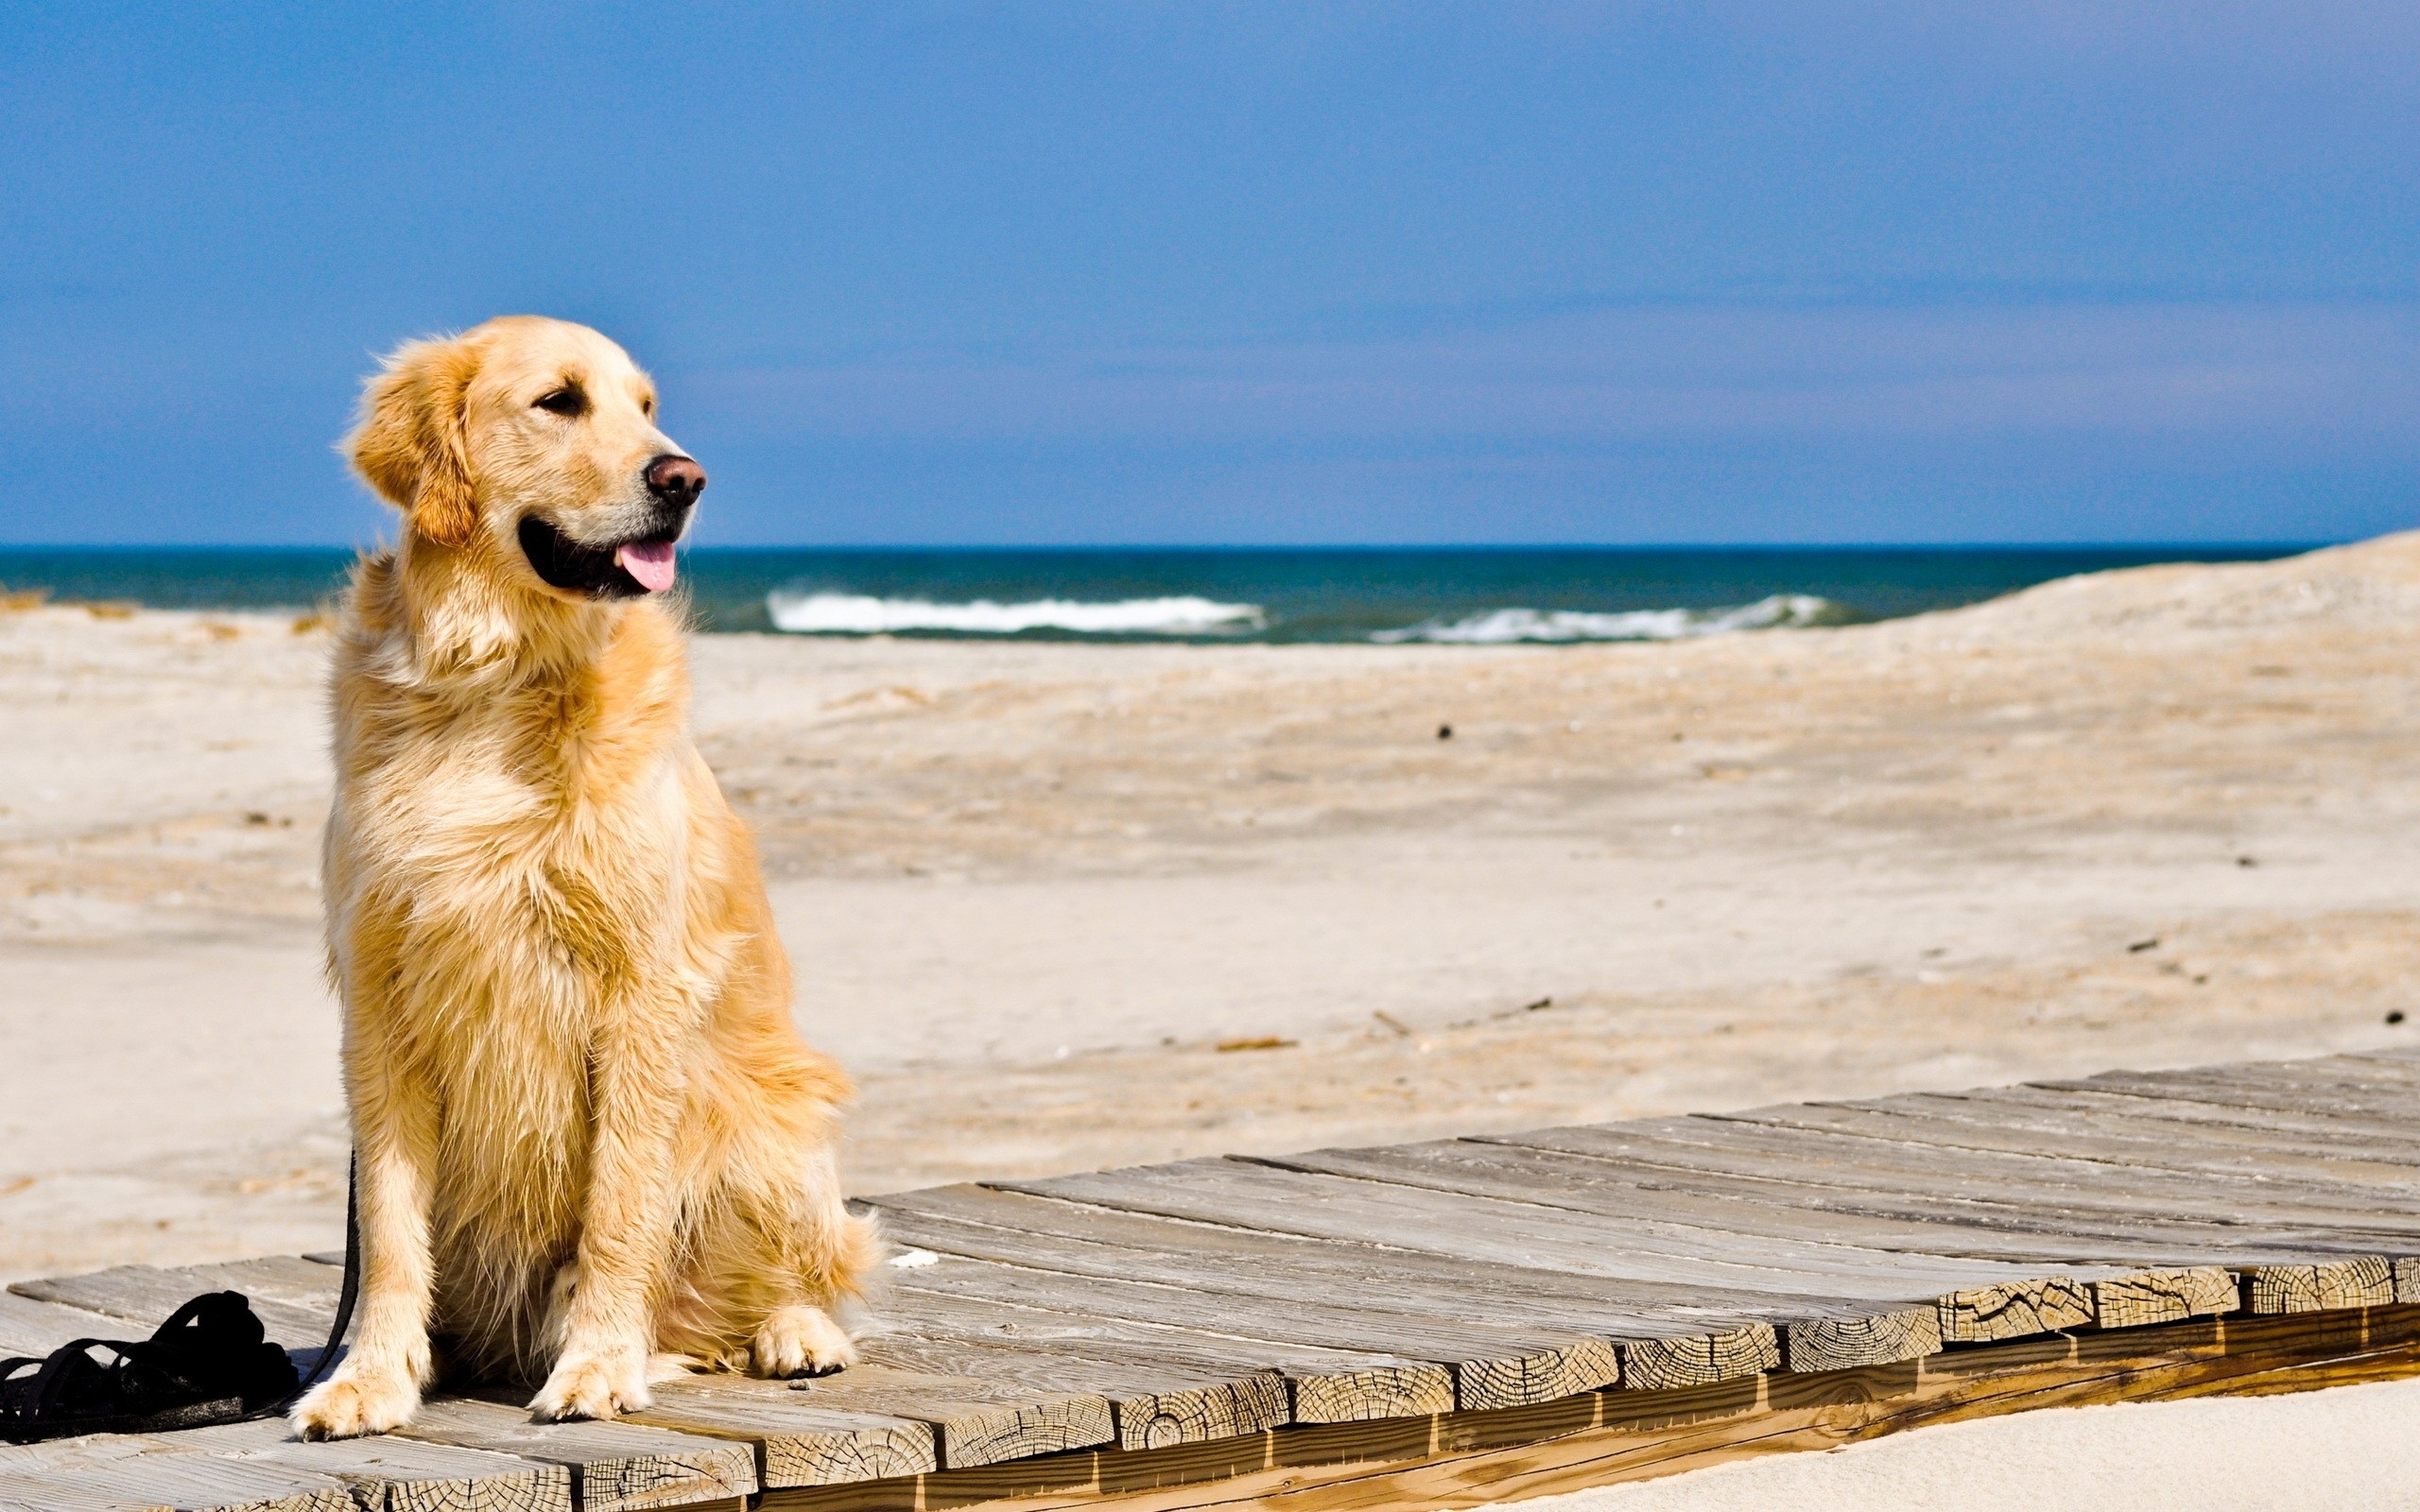 Don’t bring Fido to the beach during the day from May-September.